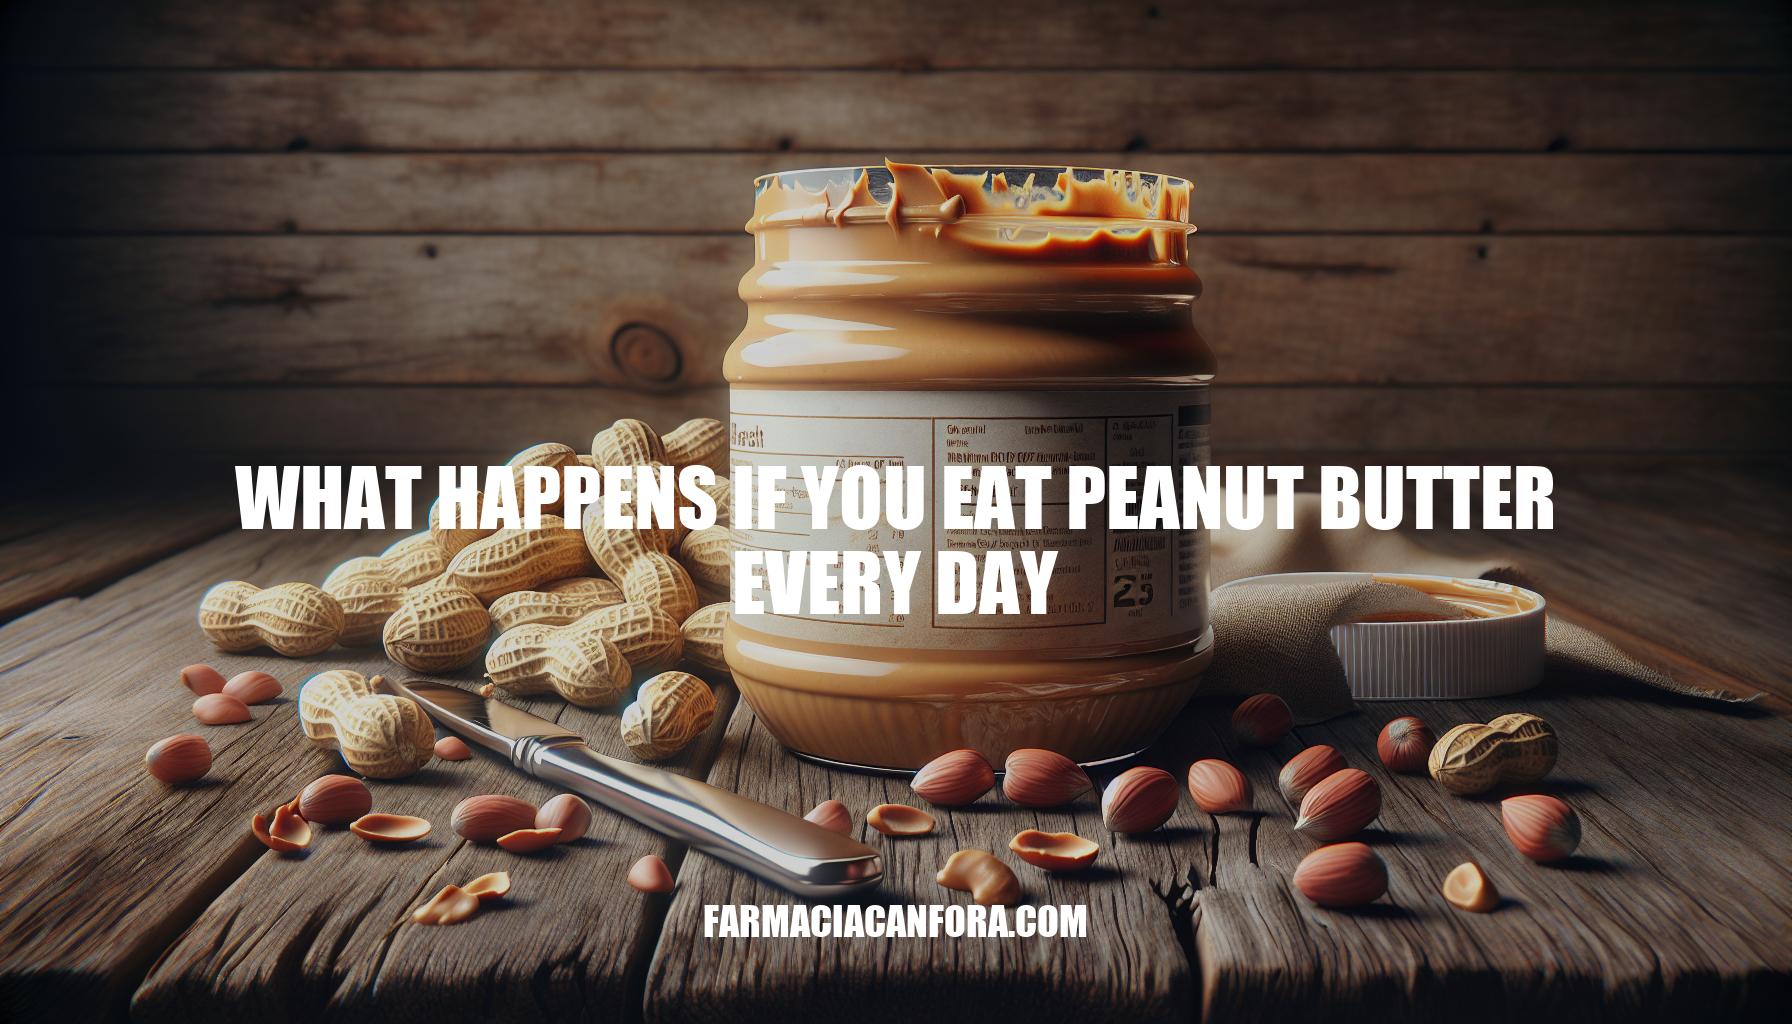 The Effects of Eating Peanut Butter Every Day: What Happens if You Eat Peanut Butter Every Day?